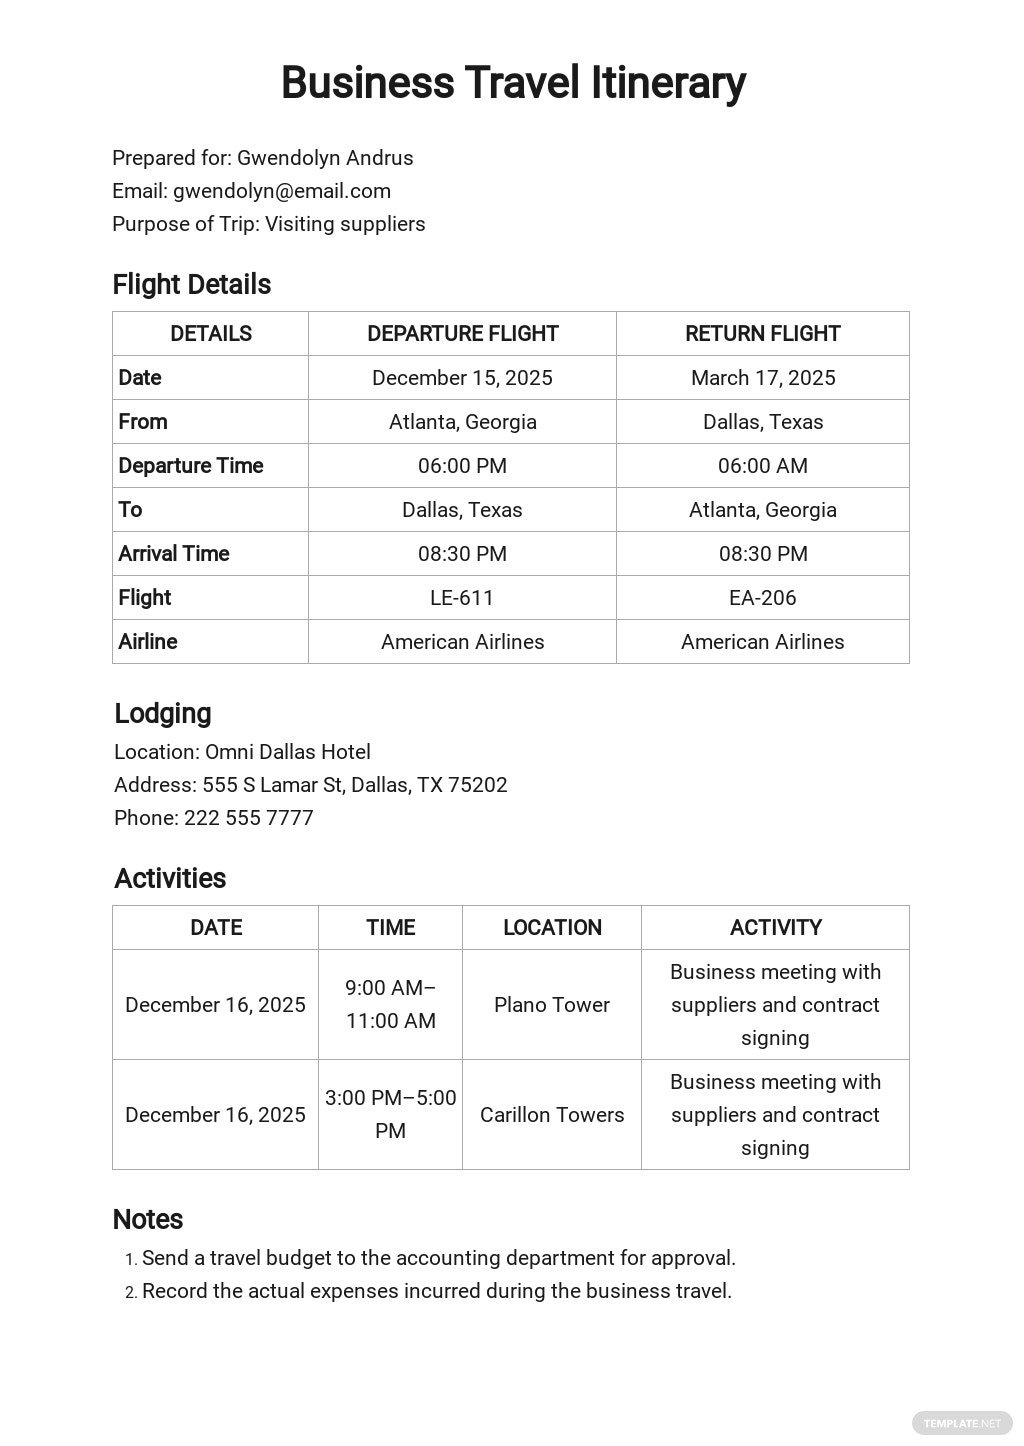 googledocsfree-business-travel-itinerary-document-template